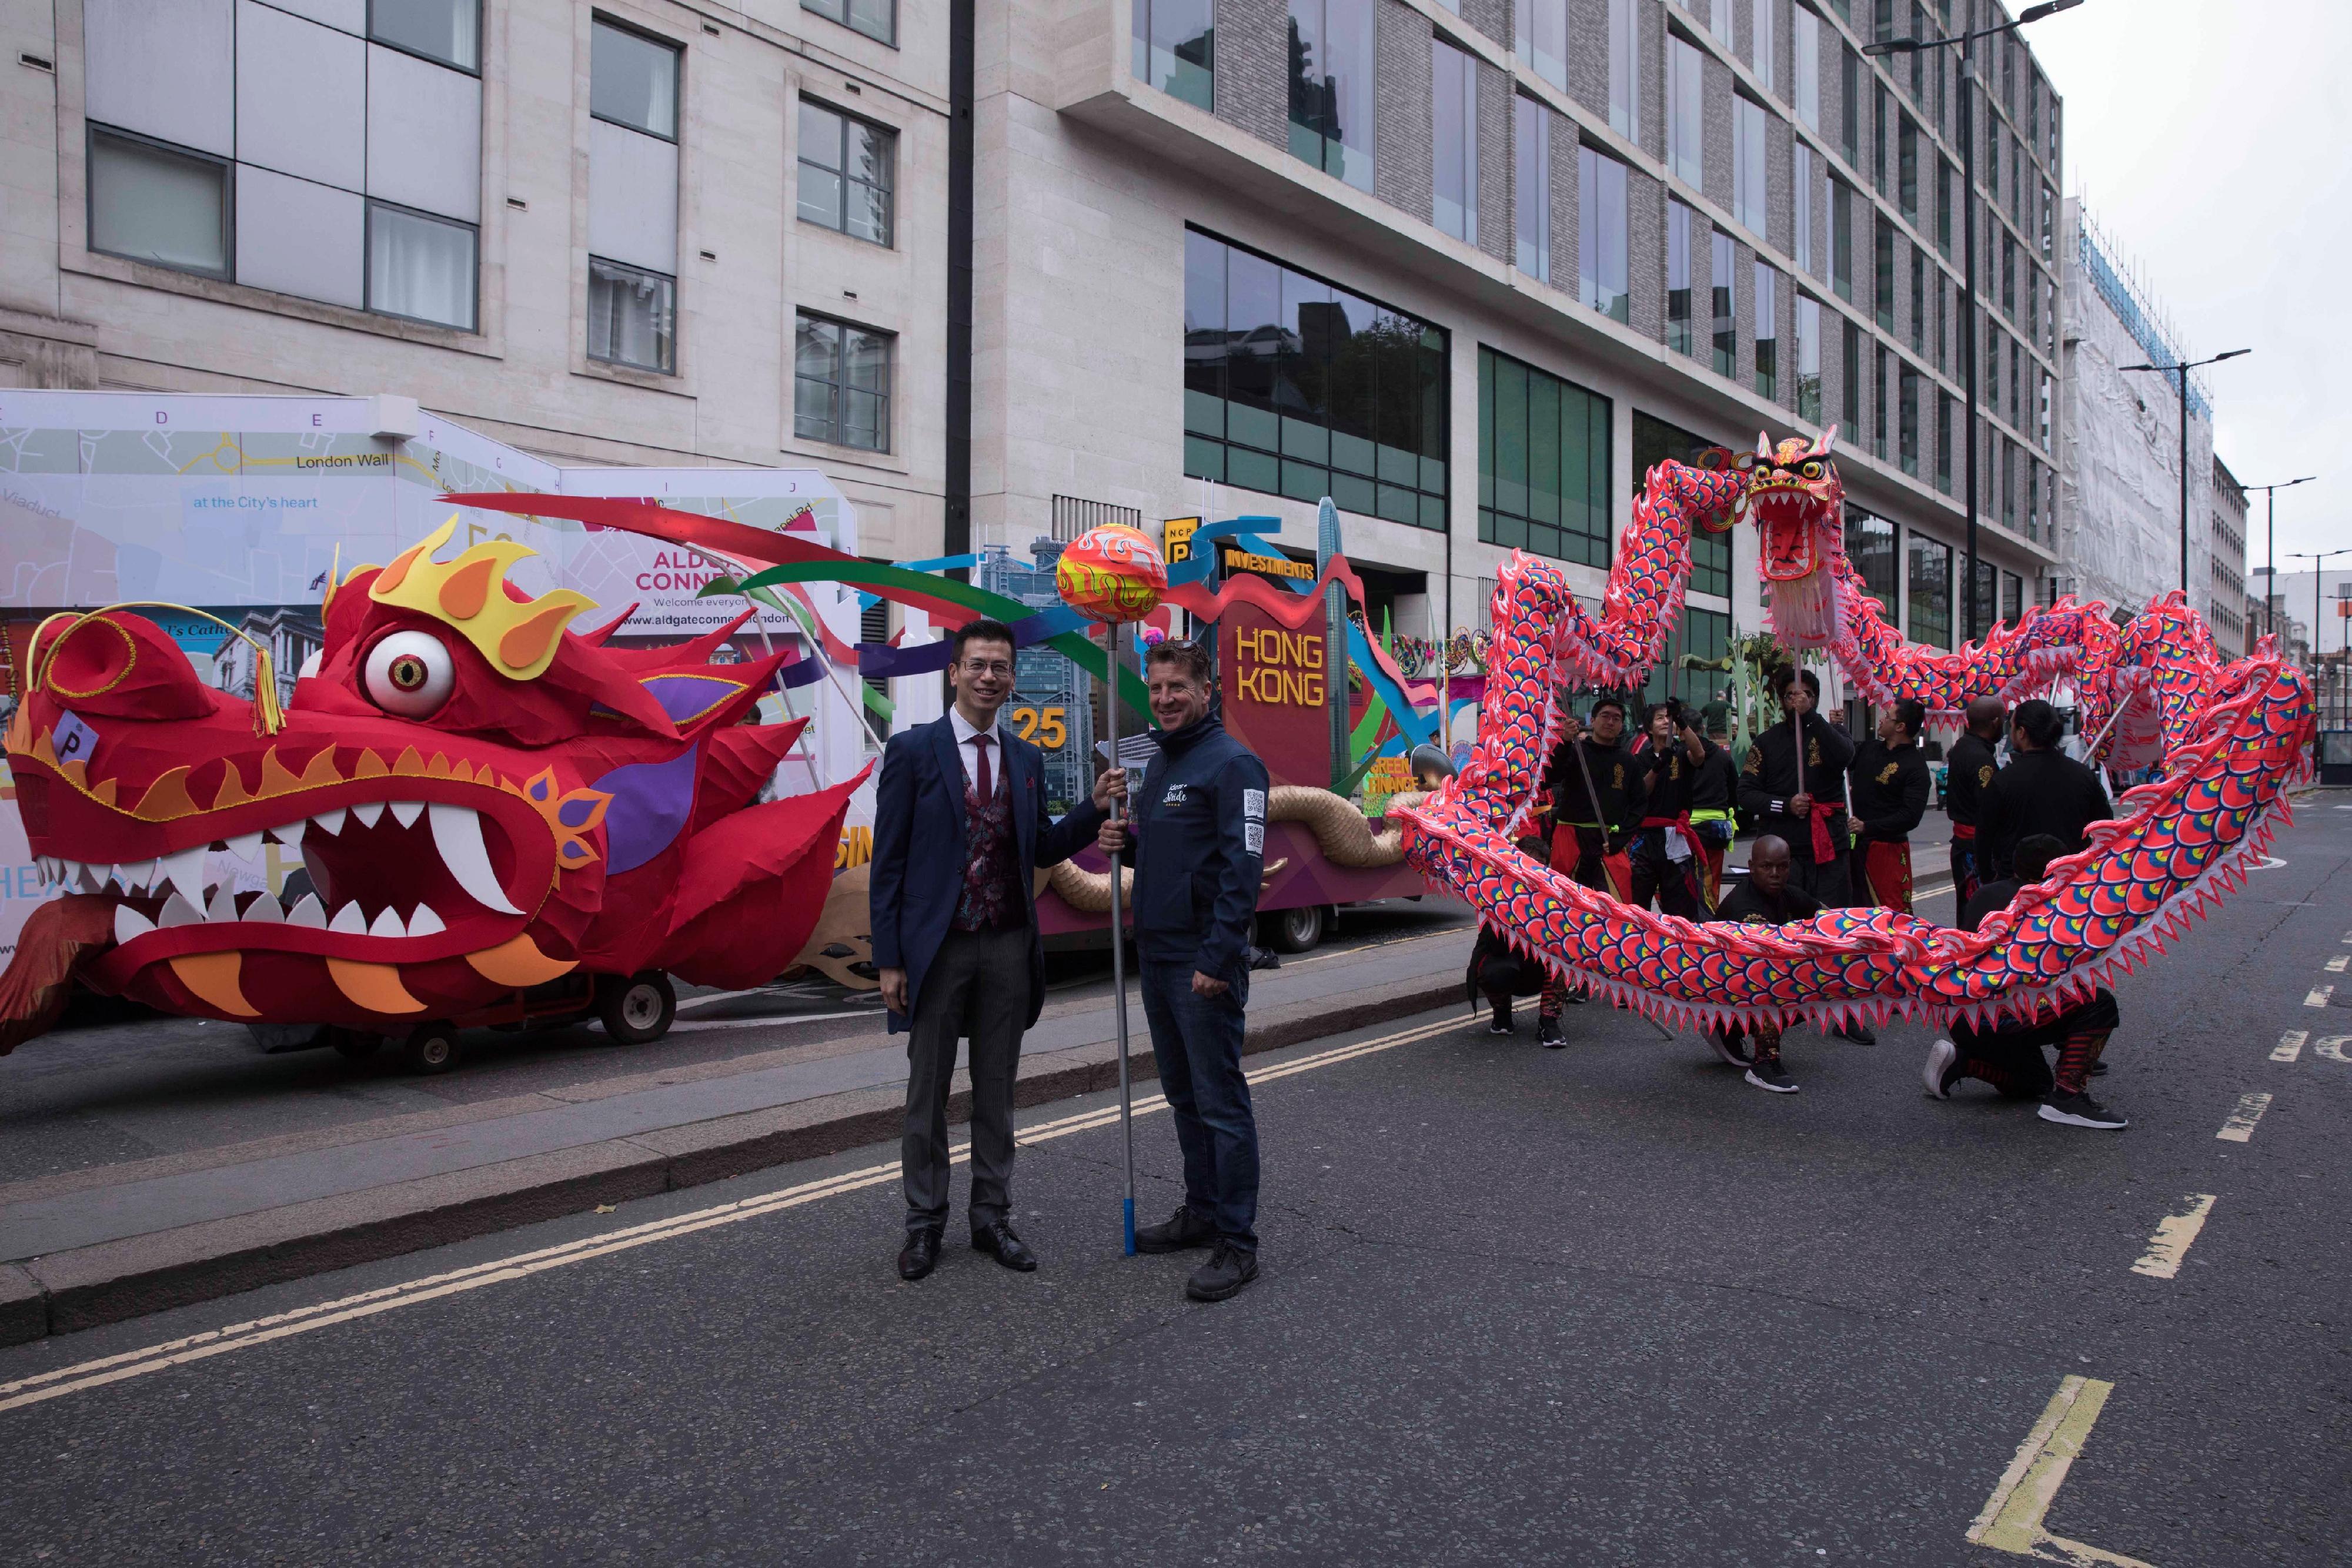 The Hong Kong Economic and Trade Office, London (London ETO) took part in the City of London Lord Mayor's Show on November 12 (London time) with a float highlighting Hong Kong's status as an international financial centre. A total of 25 flag bearers marched alongside the float, commemorating the 25th anniversary of the establishment of the Hong Kong Special Administrative Region. Photo shows the Director-General of the London ETO, Mr Gilford Law (left), and the designer of the Hong Kong float, Mr Simon Glover (right) at the event.